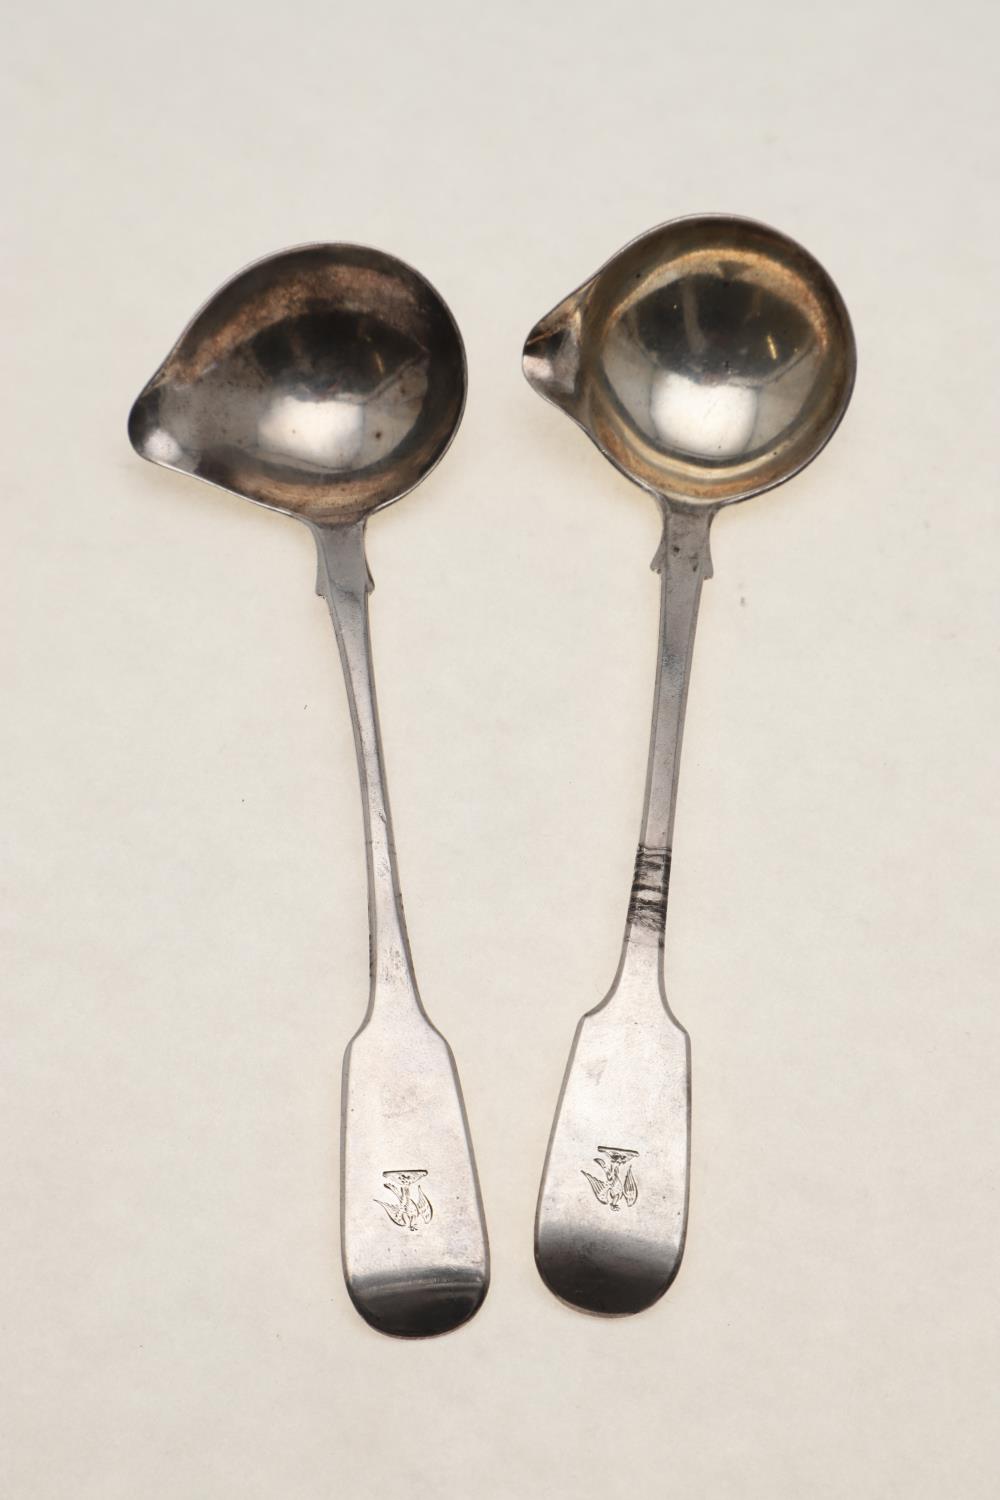 TWO SIMILAR EARLY VICTORIAN CREAM/SAUCE LADLES. - Image 2 of 7